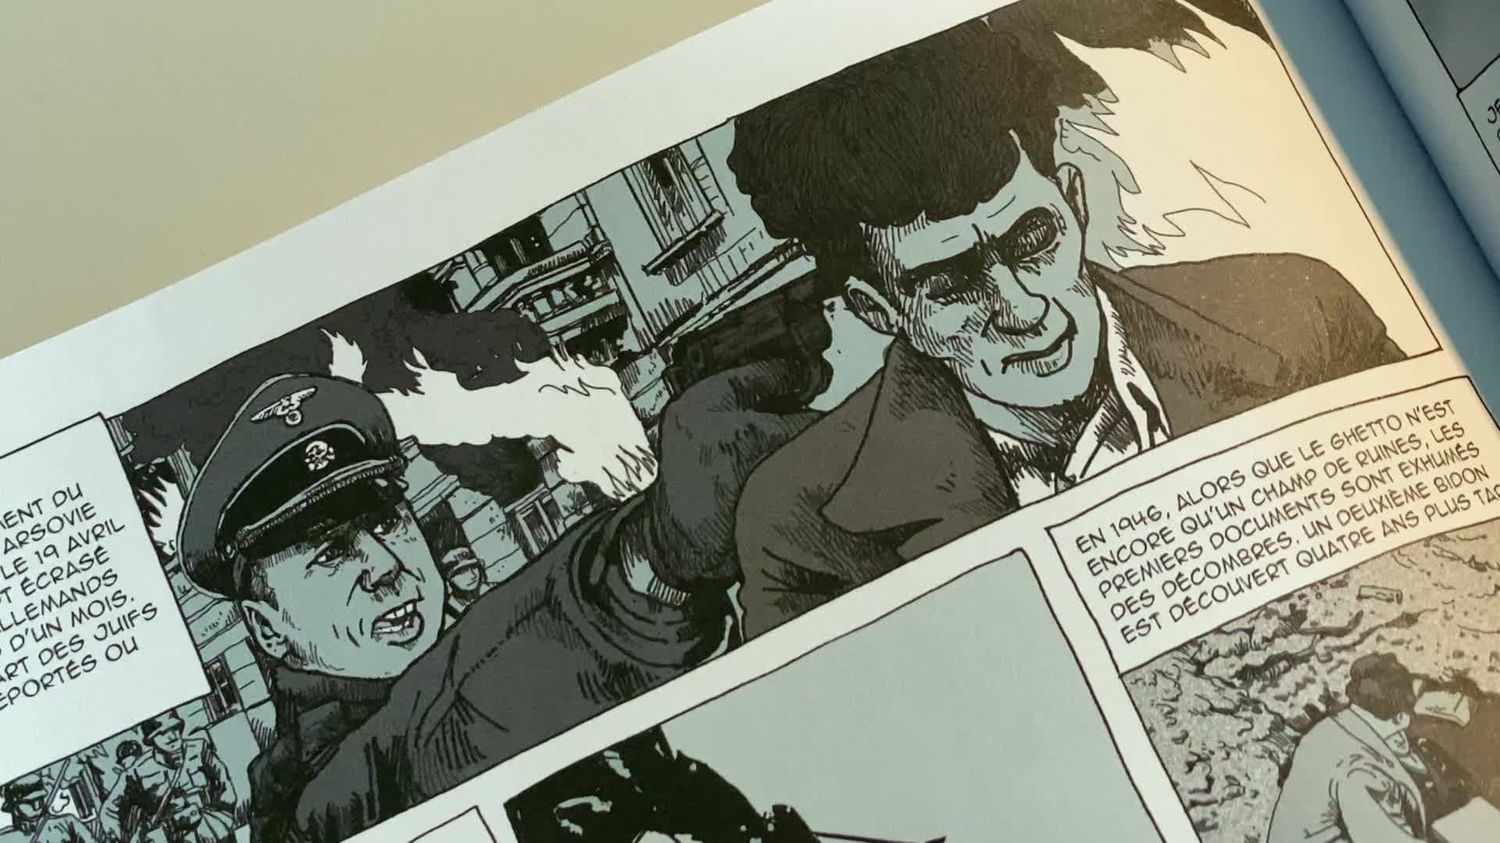 French students' research on the "bullet holocaust" in Eastern Europe told in a comic book